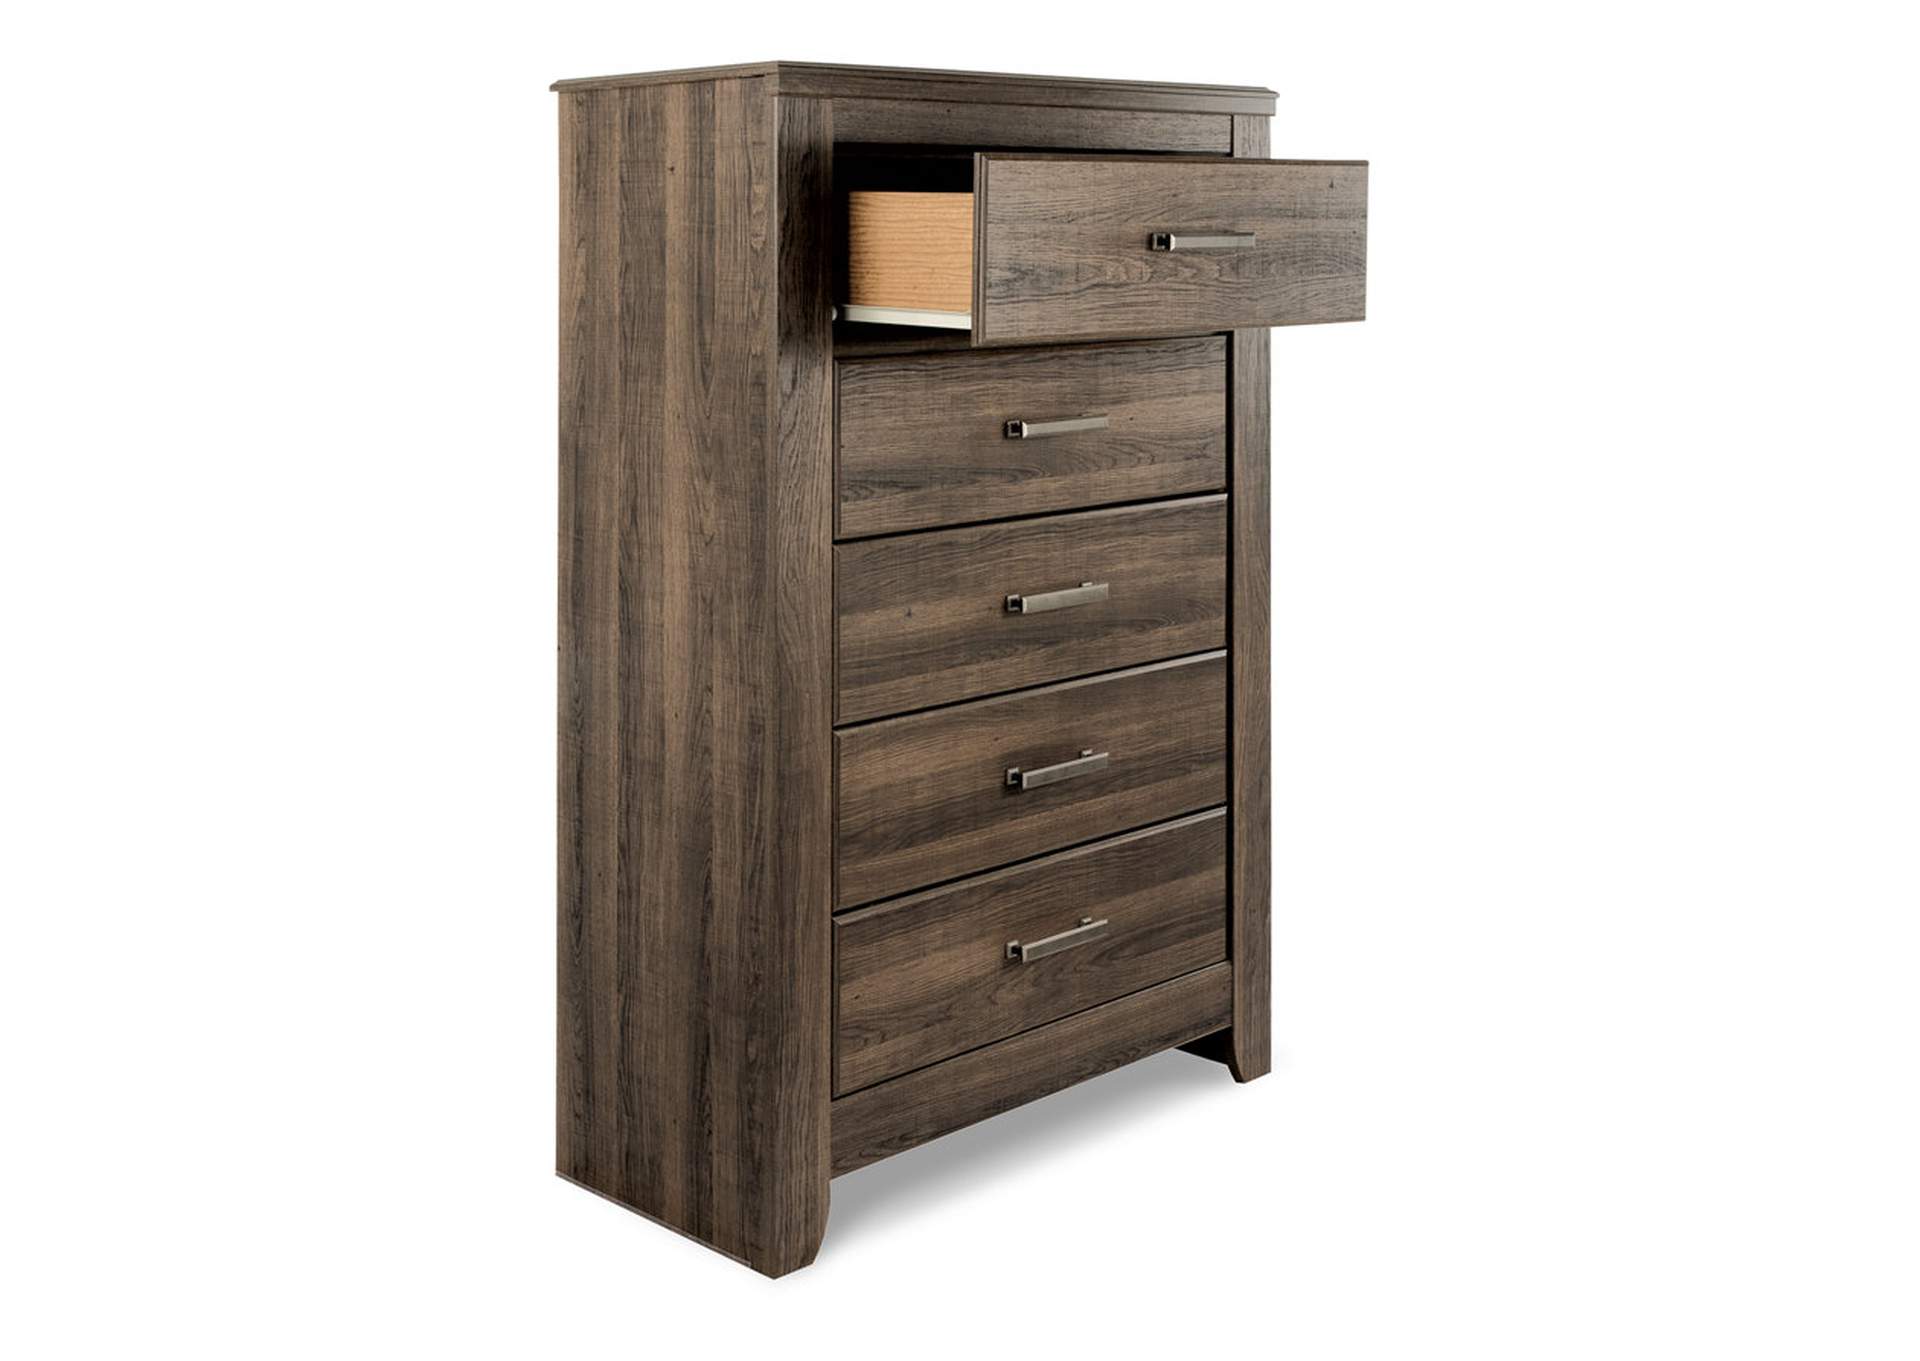 Juararo California King Poster Bed, Dresser, Mirror, Chest and 2 Nightstands,Signature Design By Ashley